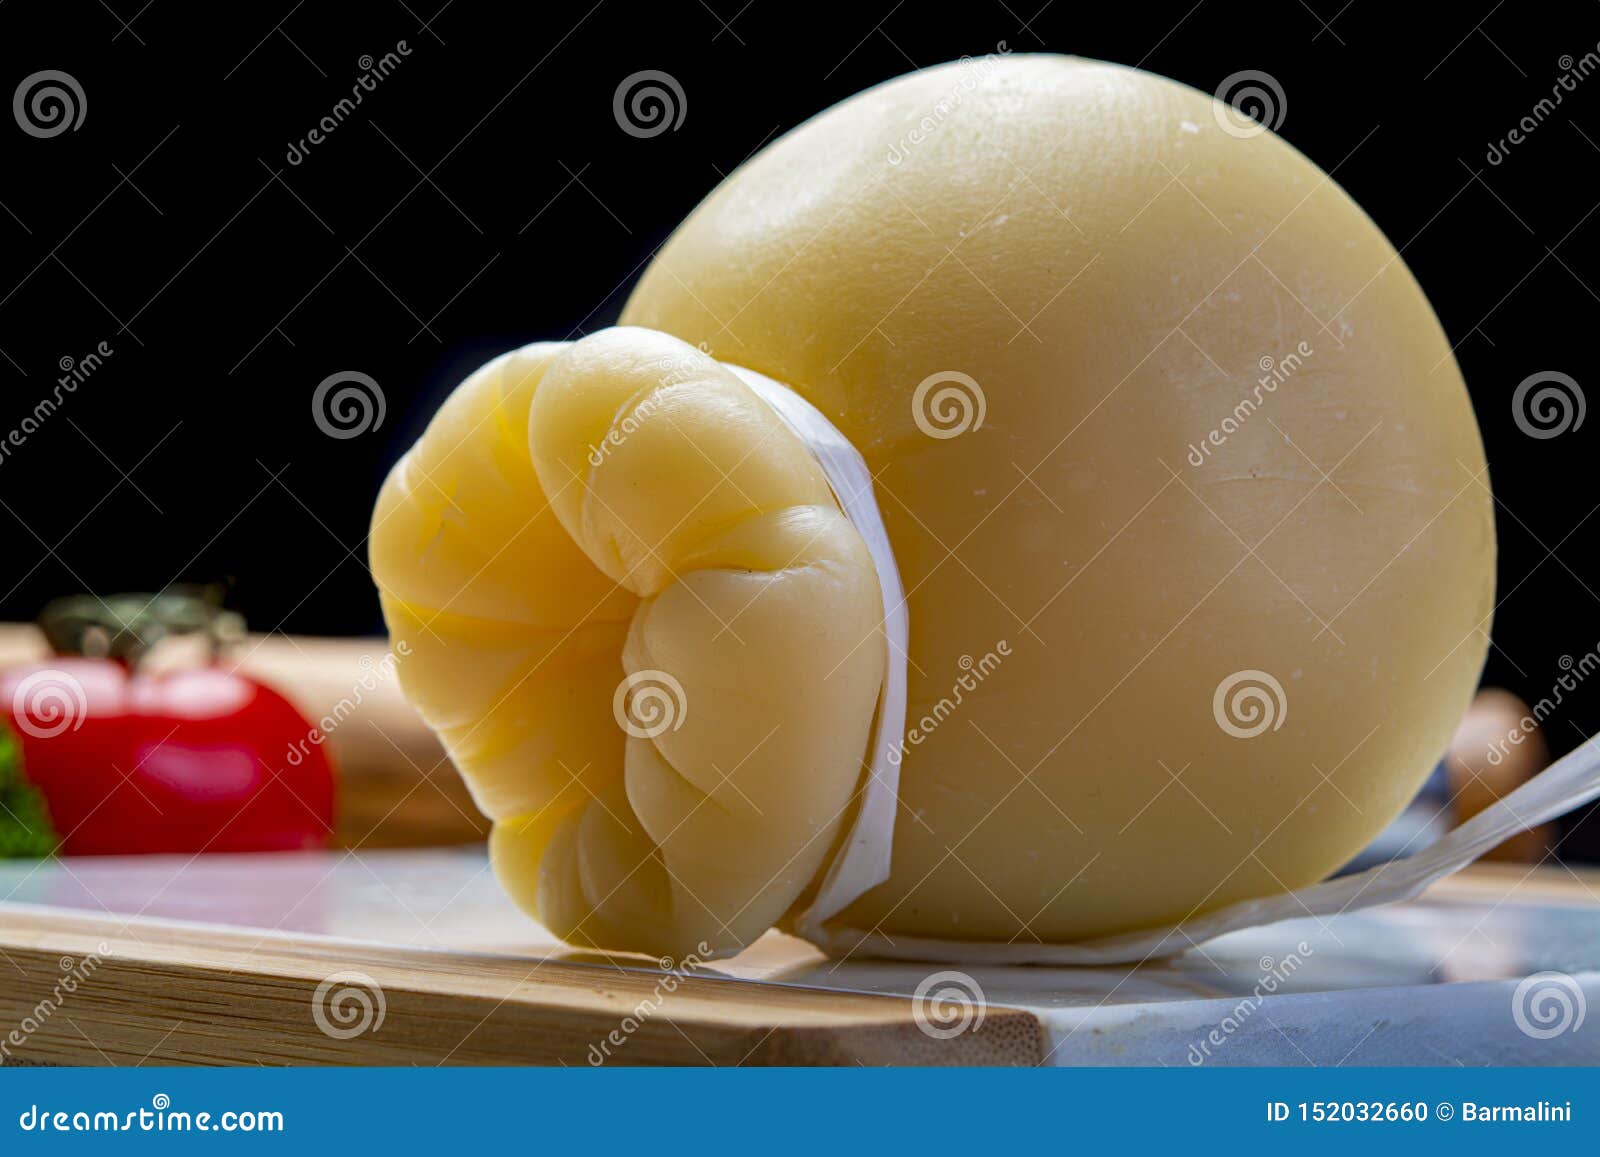 Italian Provolone or Provola Caciocavallo Hard and Smoked Cheeses in  Teardrop Form Served on White Marble Plate Close Up Stock Photo - Image of  provola, straddled: 152032660